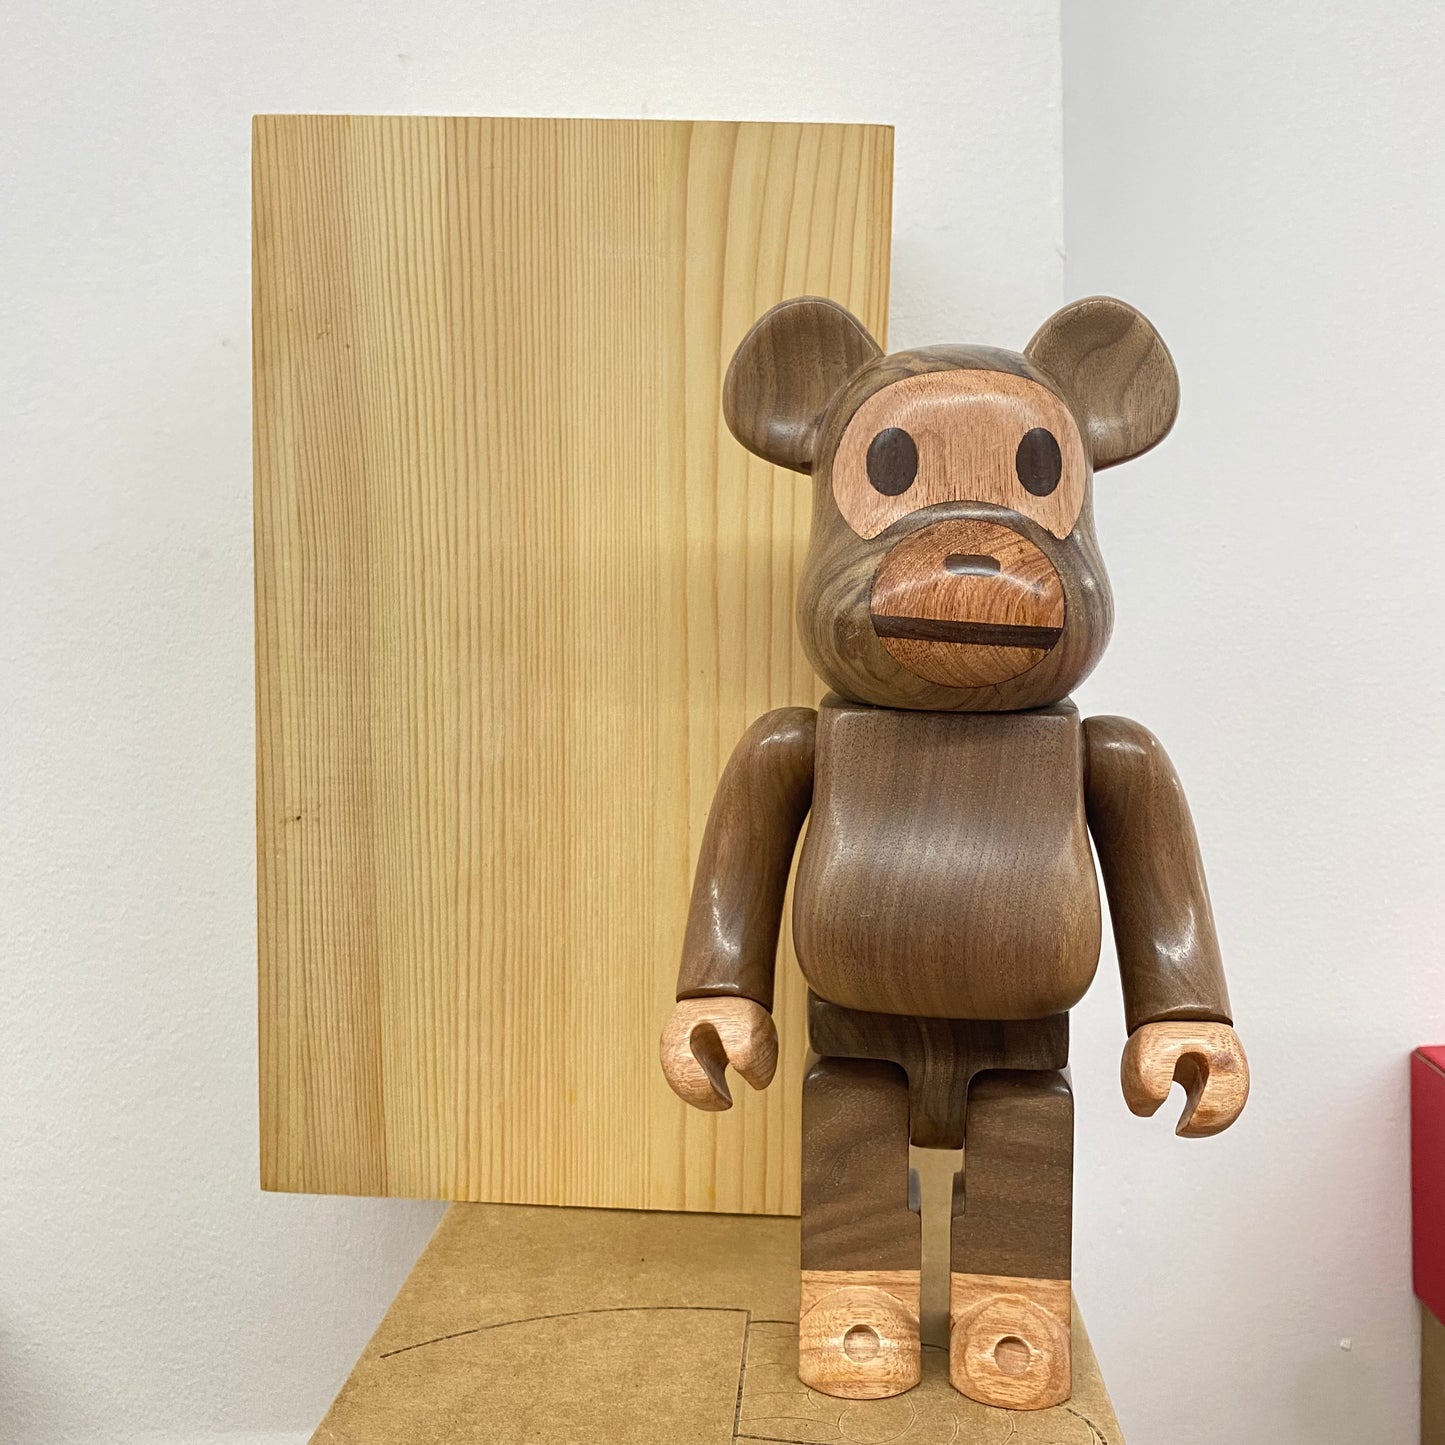 28cm 400% KAW Bearbrick Wooden Doll Anime Action Figure With Boxed